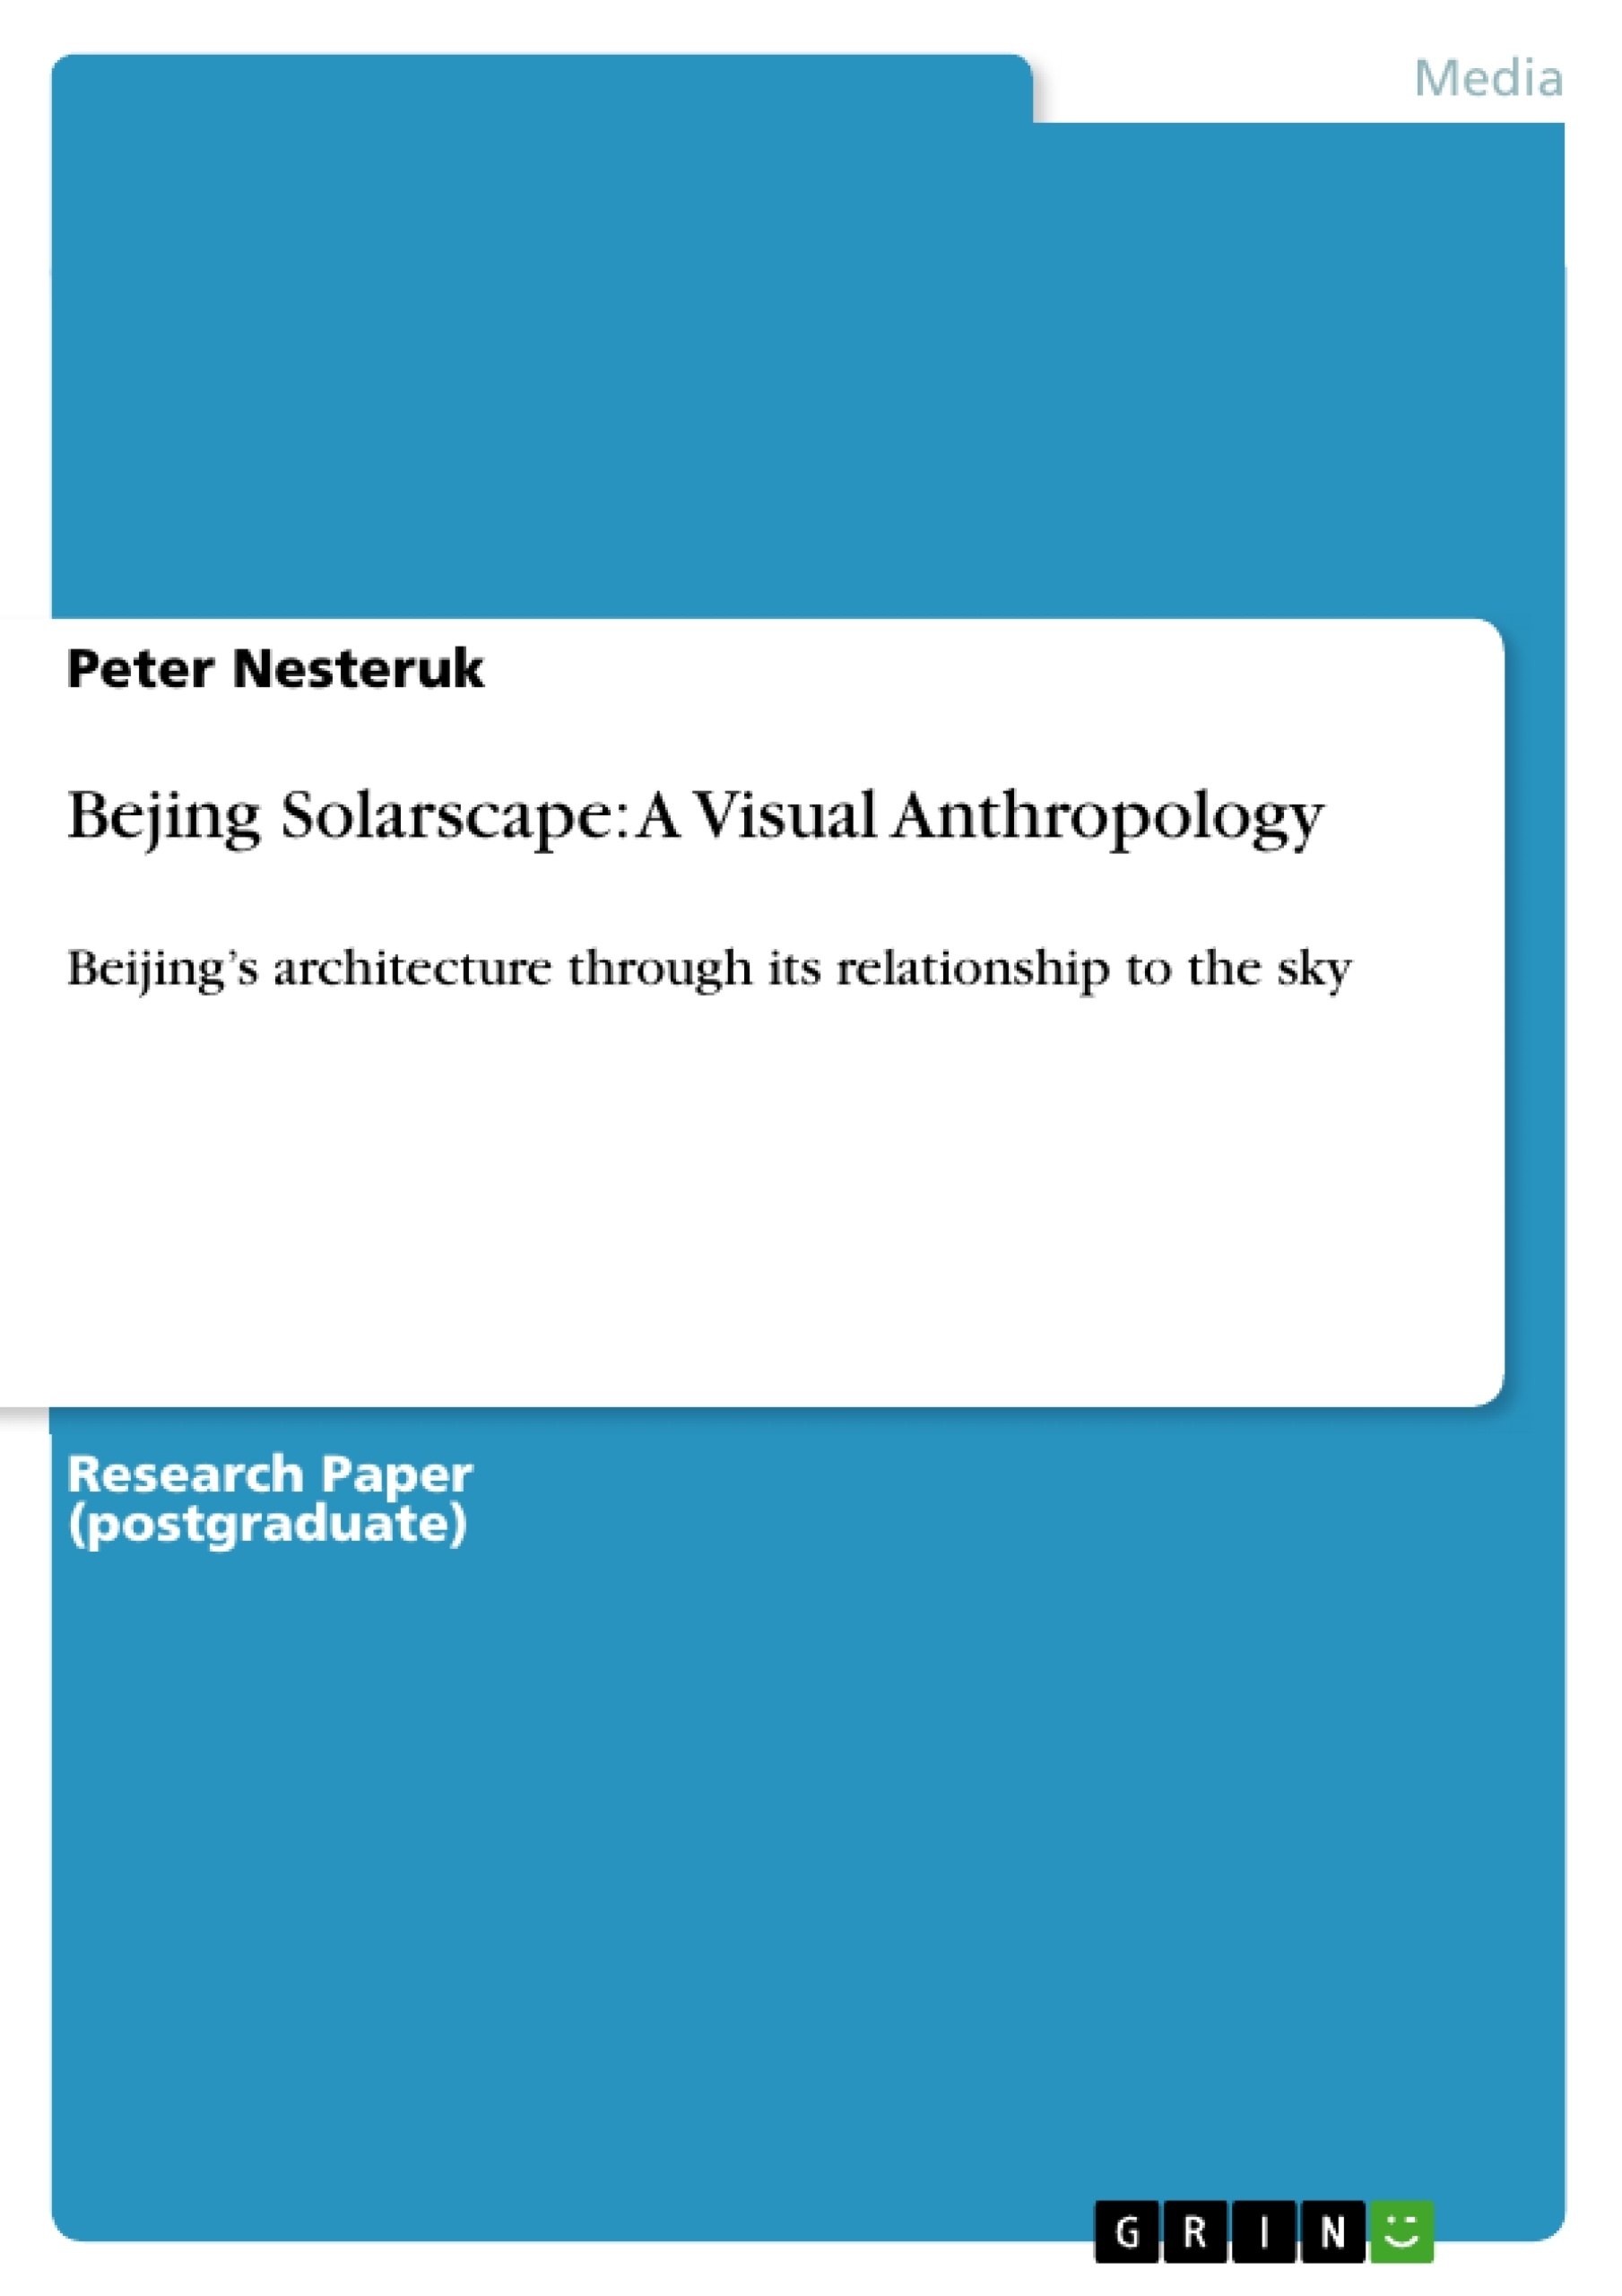 Titre: Bejing Solarscape: A Visual Anthropology